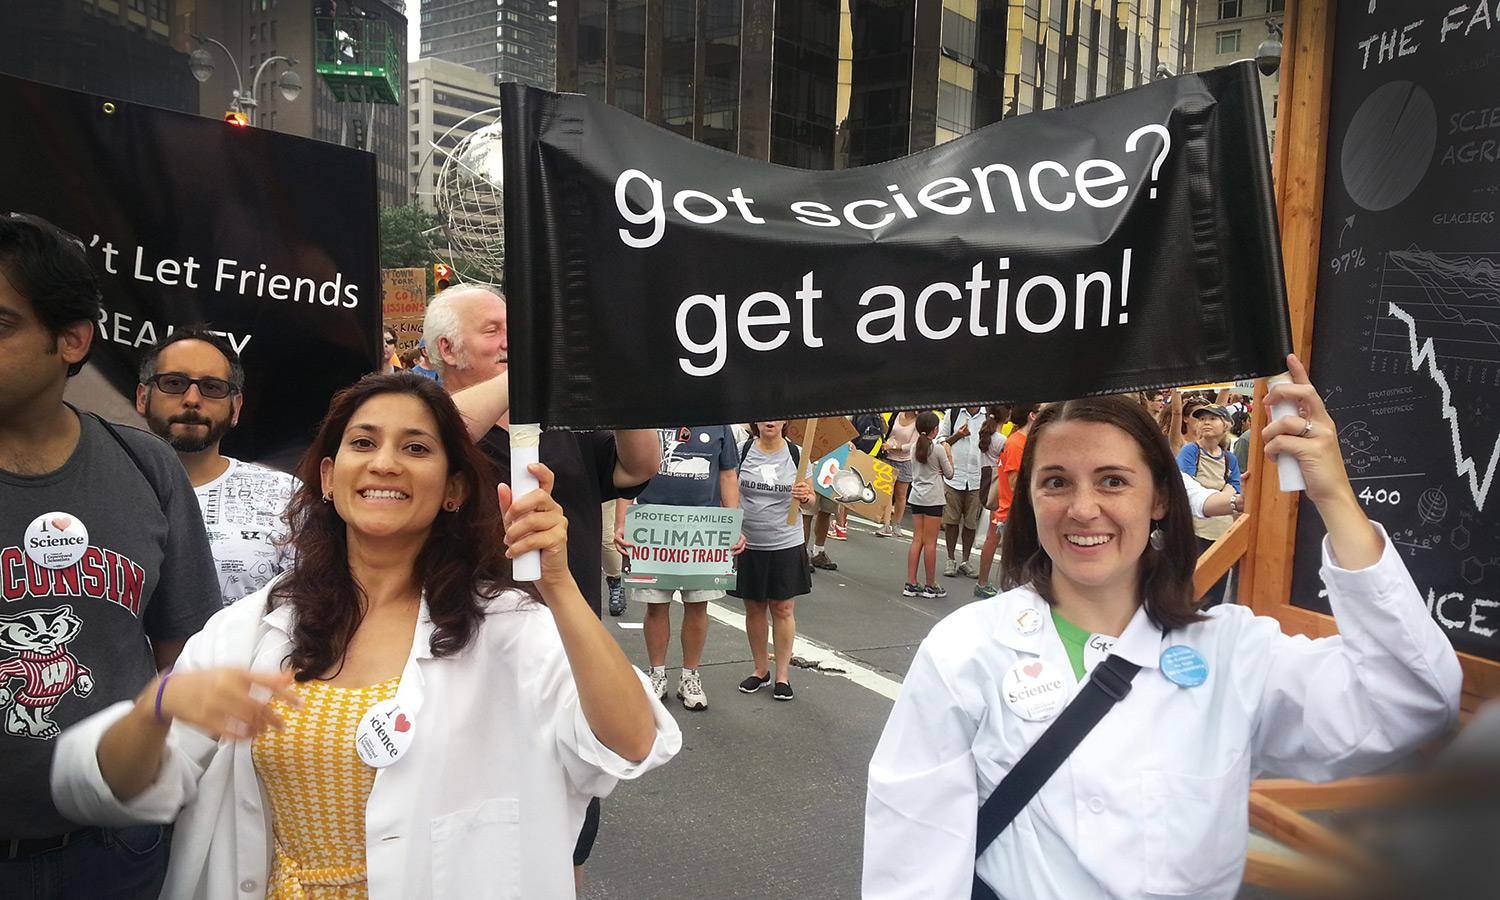 Two scientists holding a sign that says "Got Science? Get Action!"